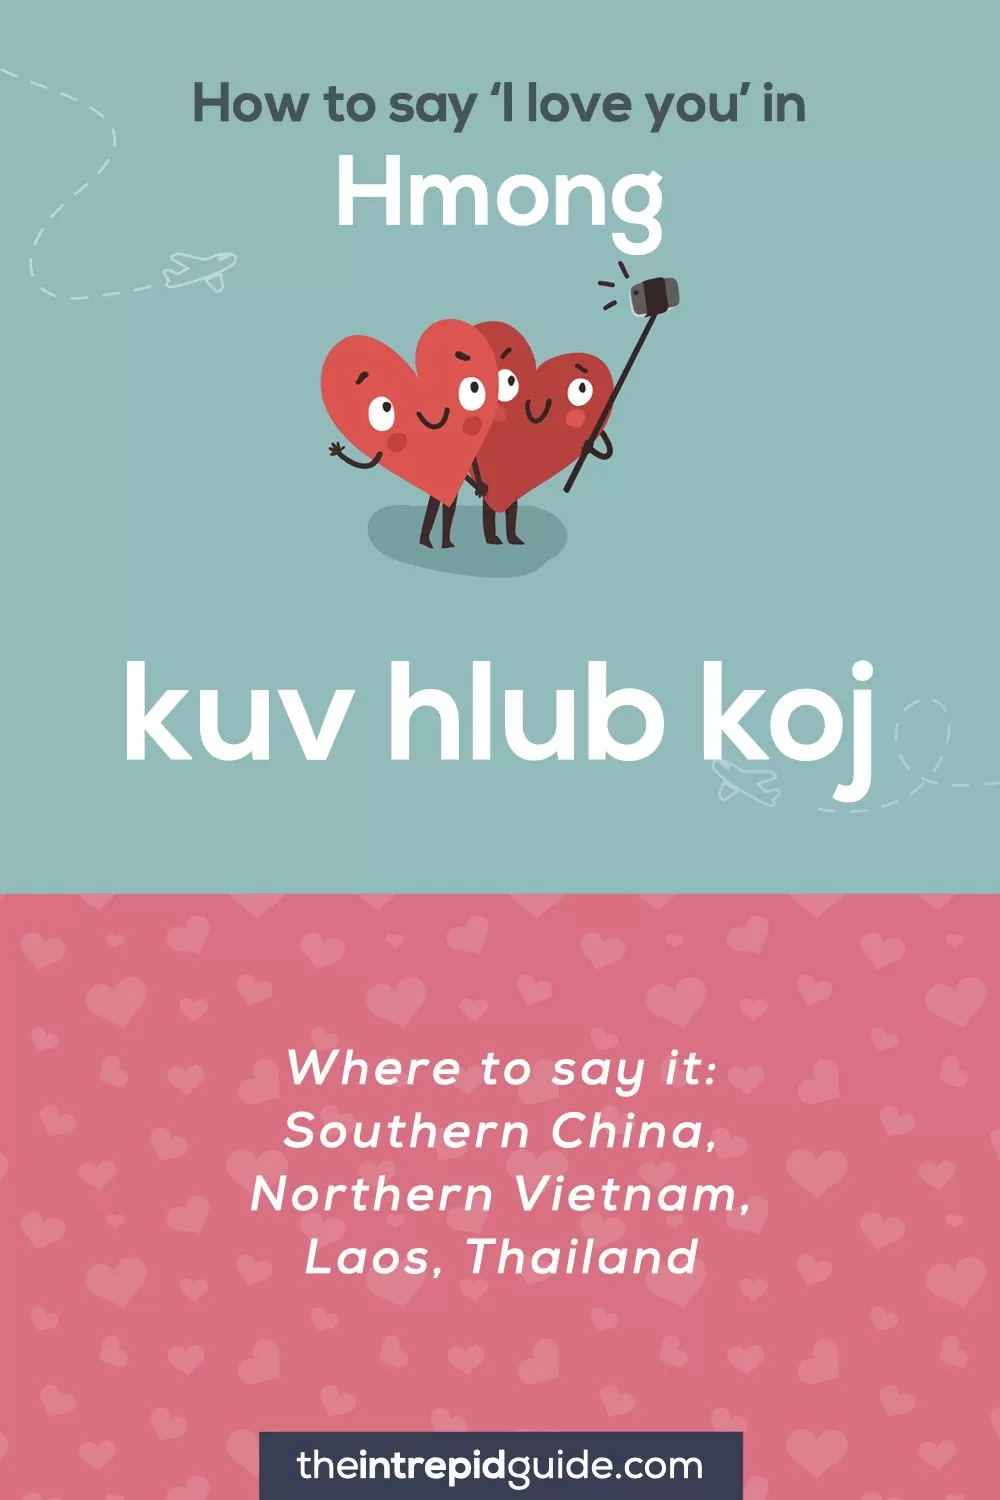 How to say I love you in different languages - Hmong - kuv hlub koj